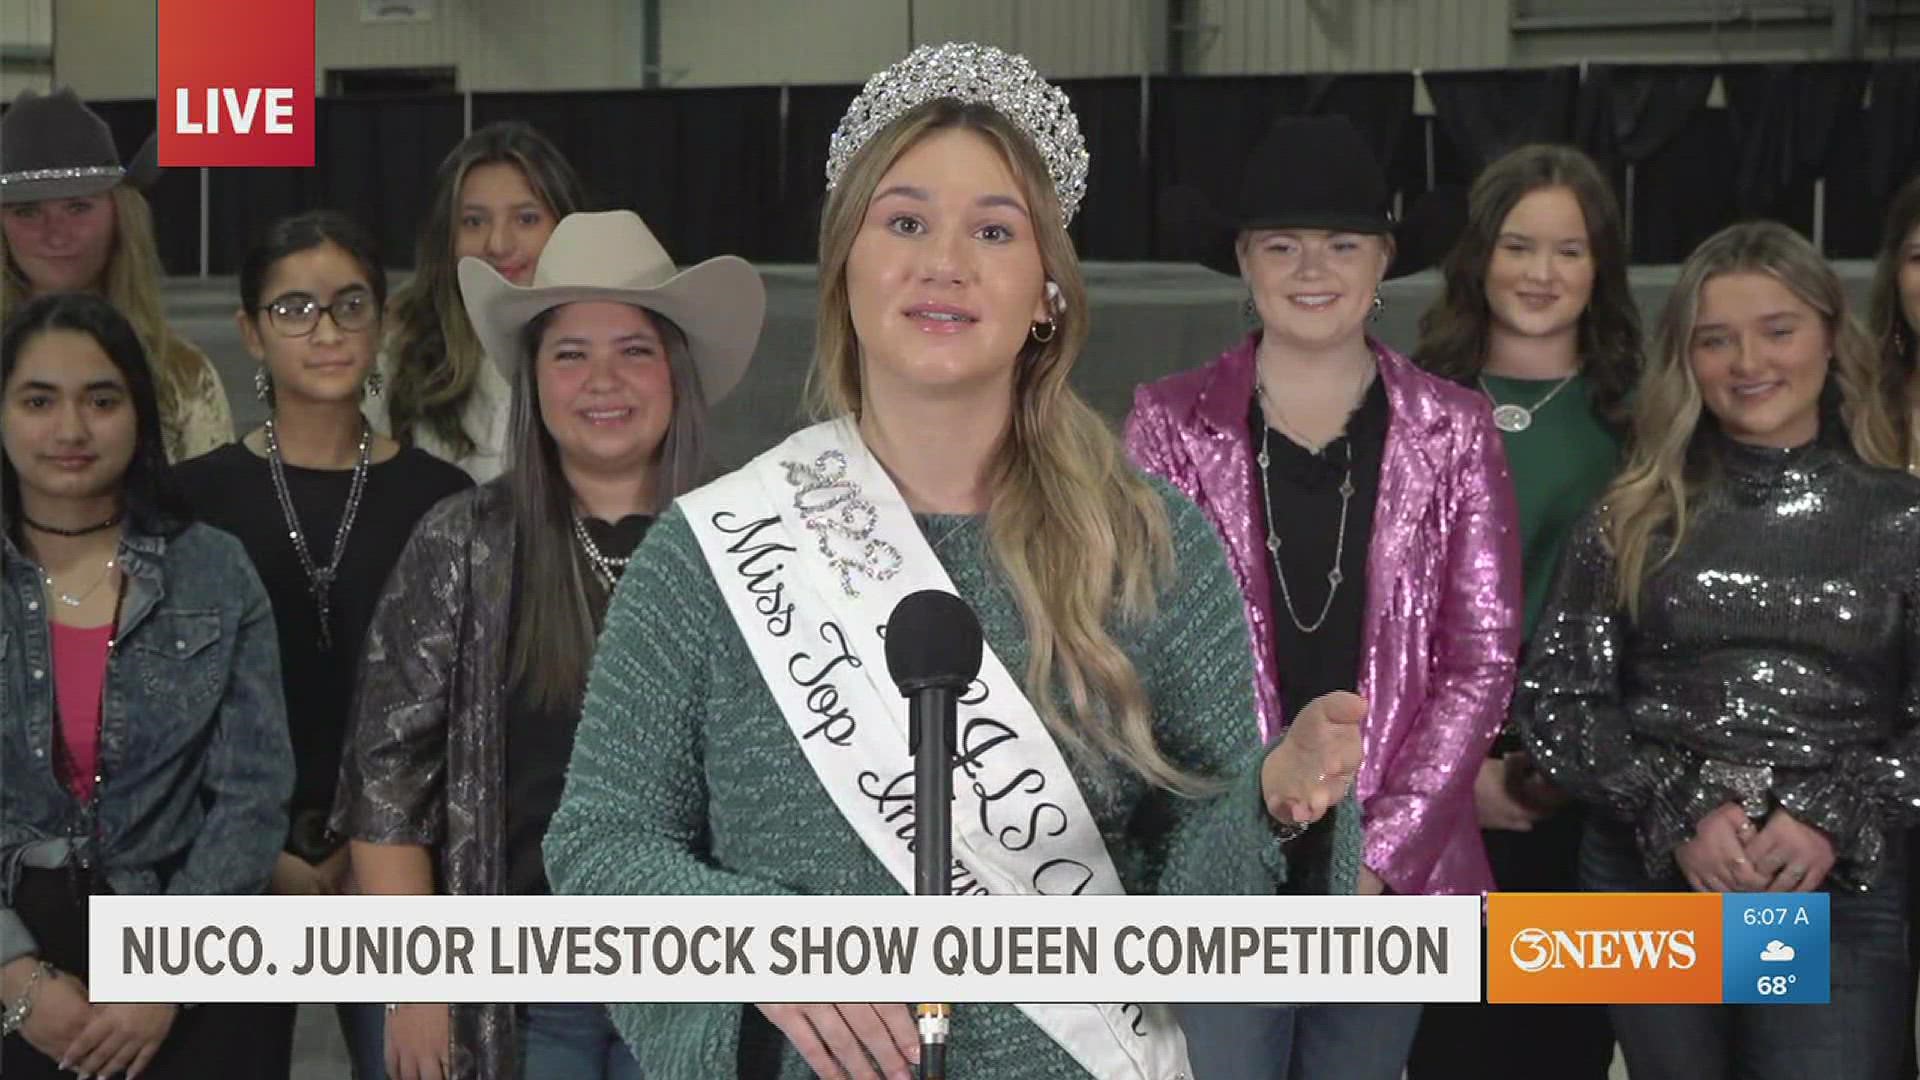 The outgoing queen has some advice for the contestants this year.